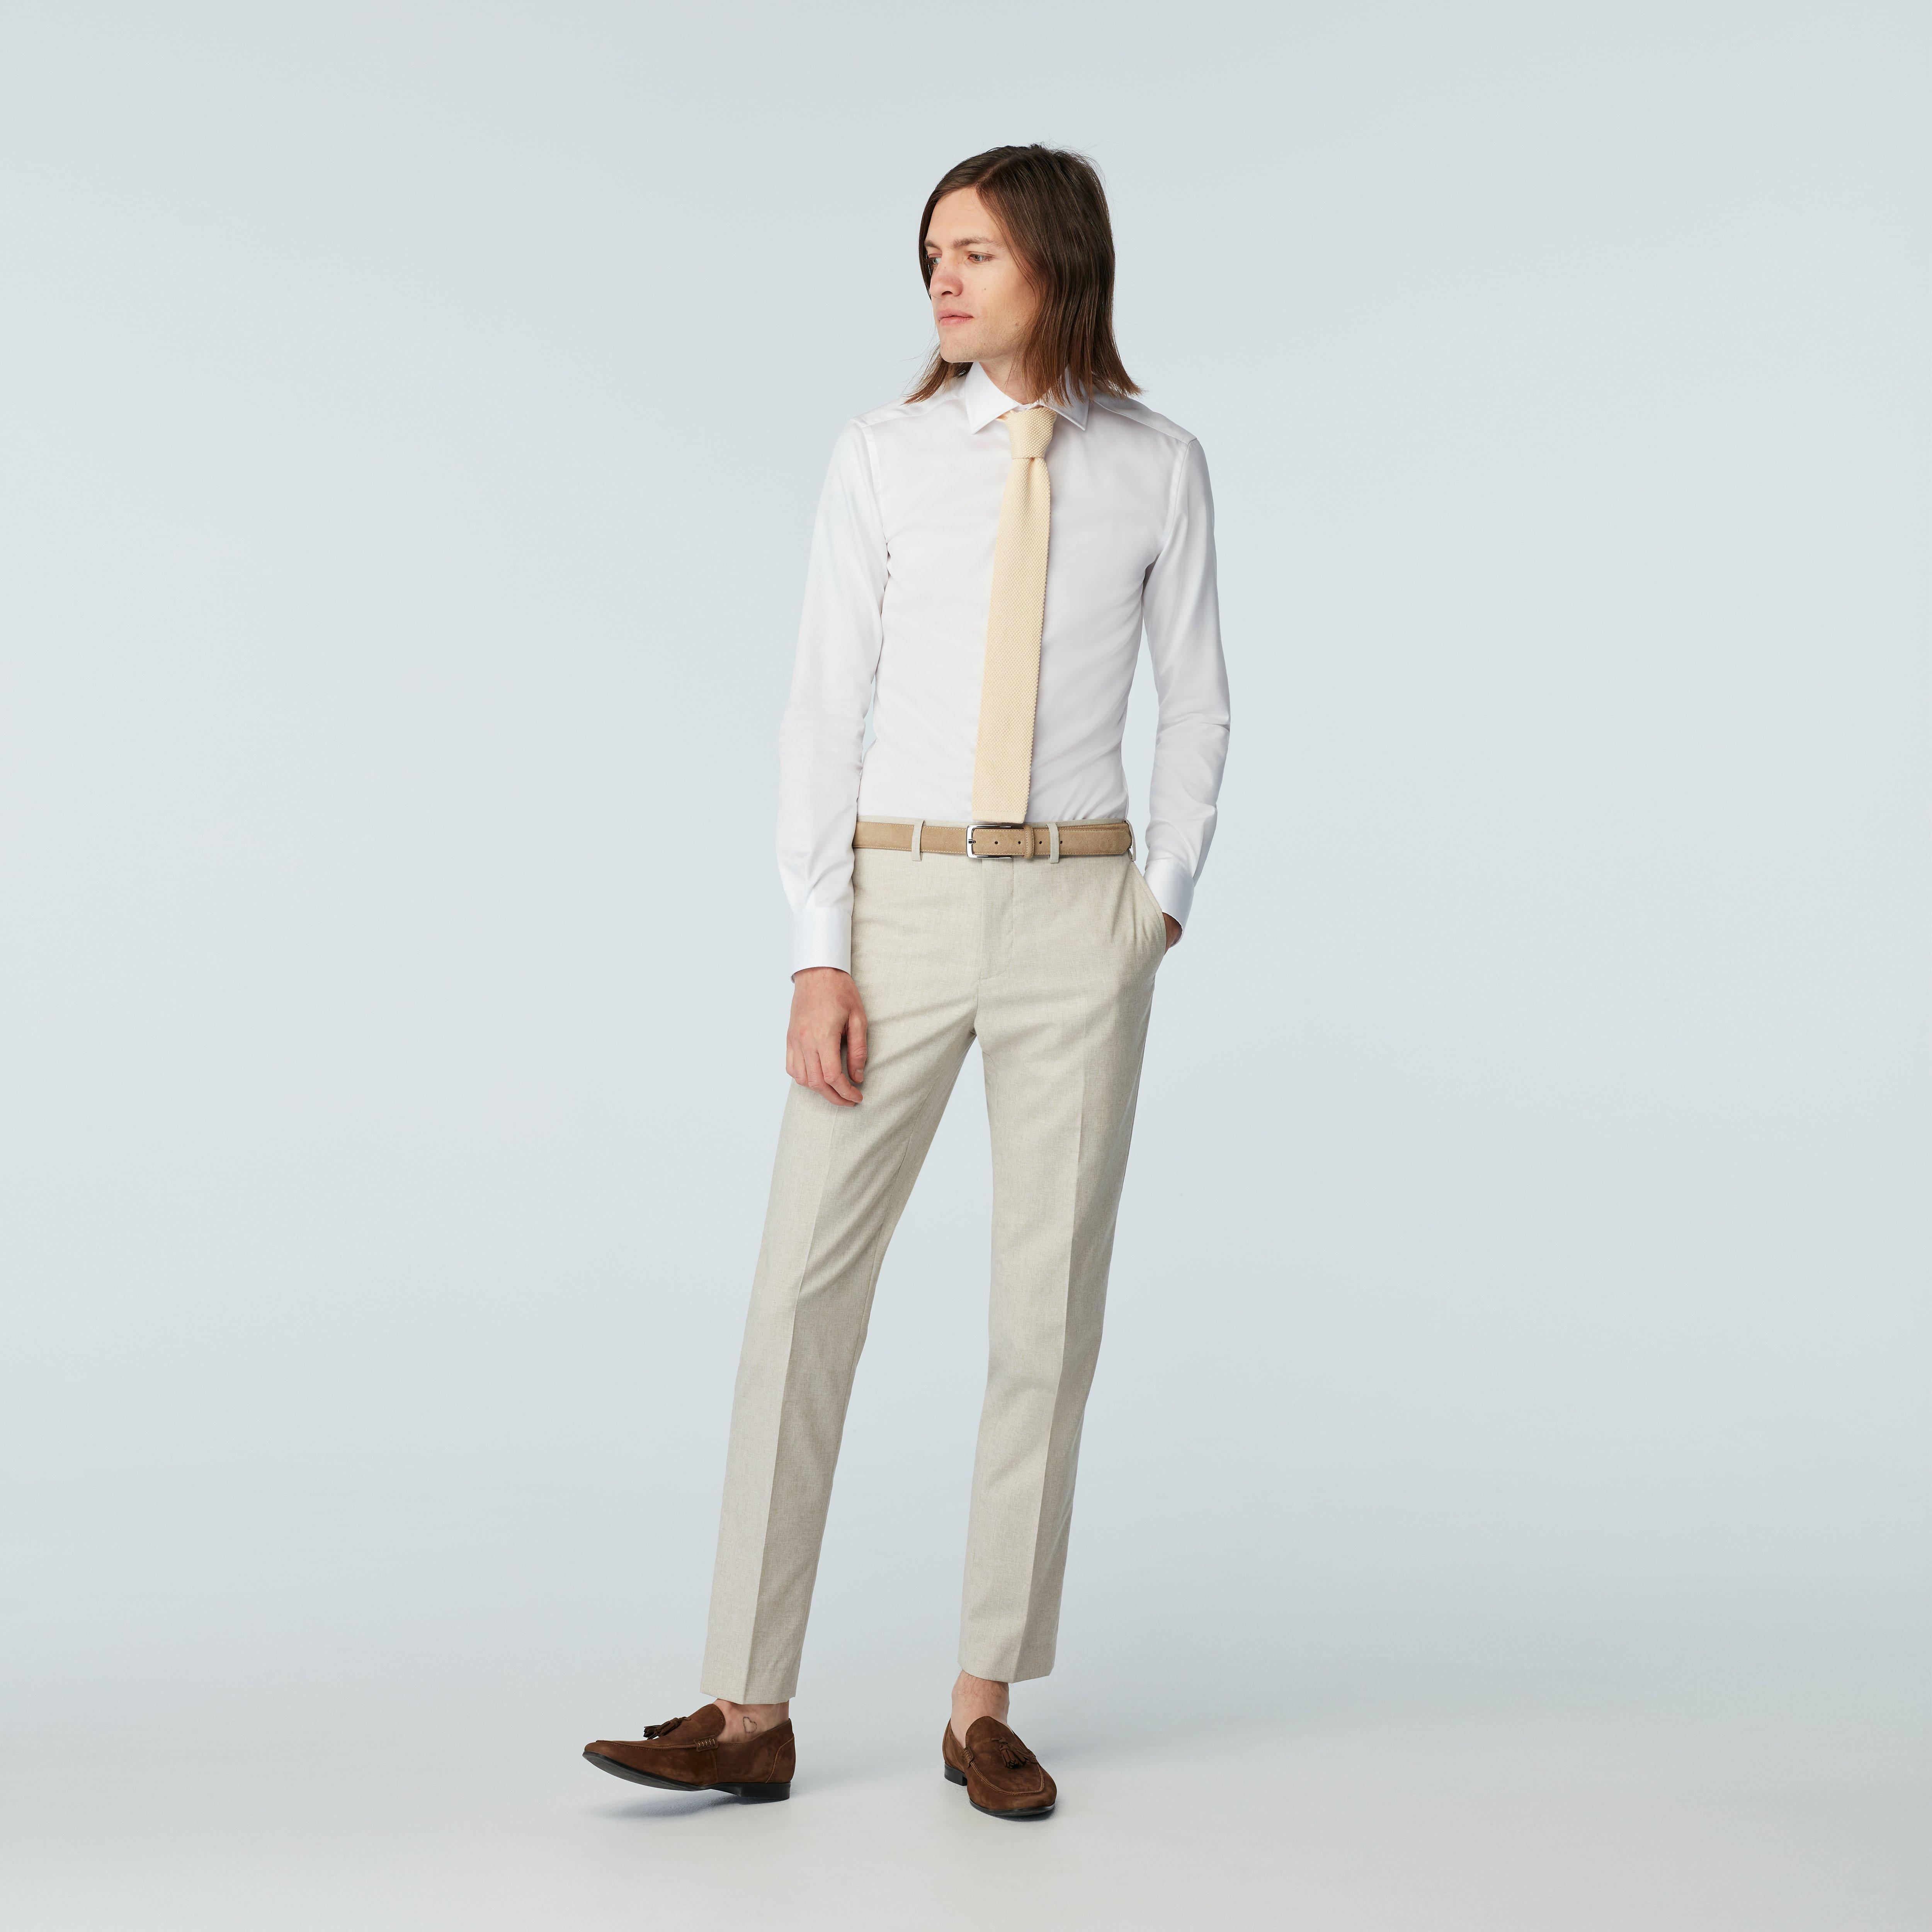 Byford by Pantaloons Light Grey Slim Fit Self Design Flat Front Trousers